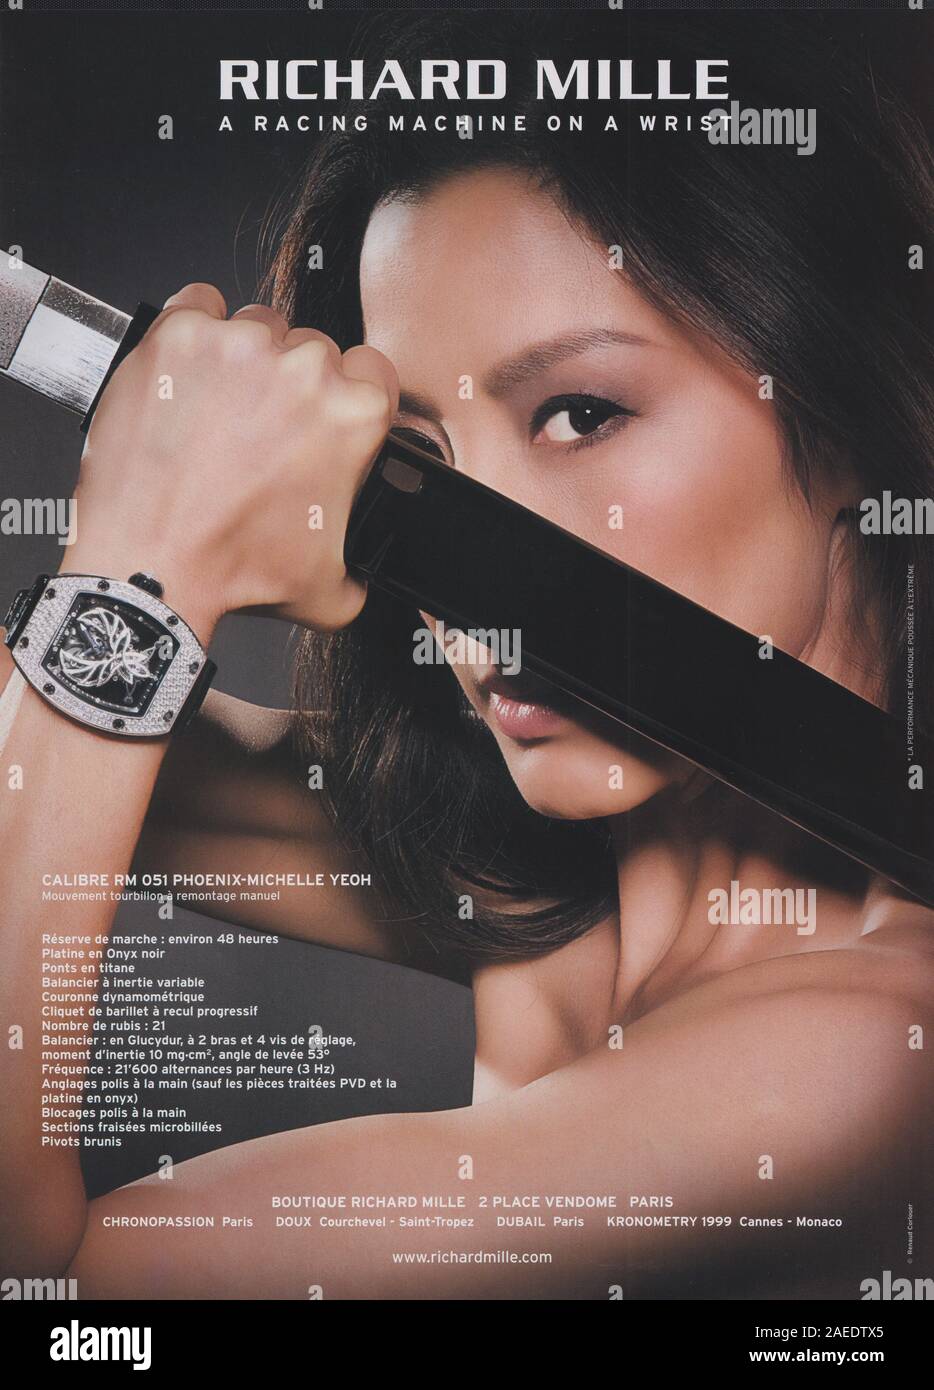 poster advertising Richard Mille watch brand with Michelle Yeoh in magazine from 2012 year, advertisement creative Richard Mille advert from 2010s Stock Photo